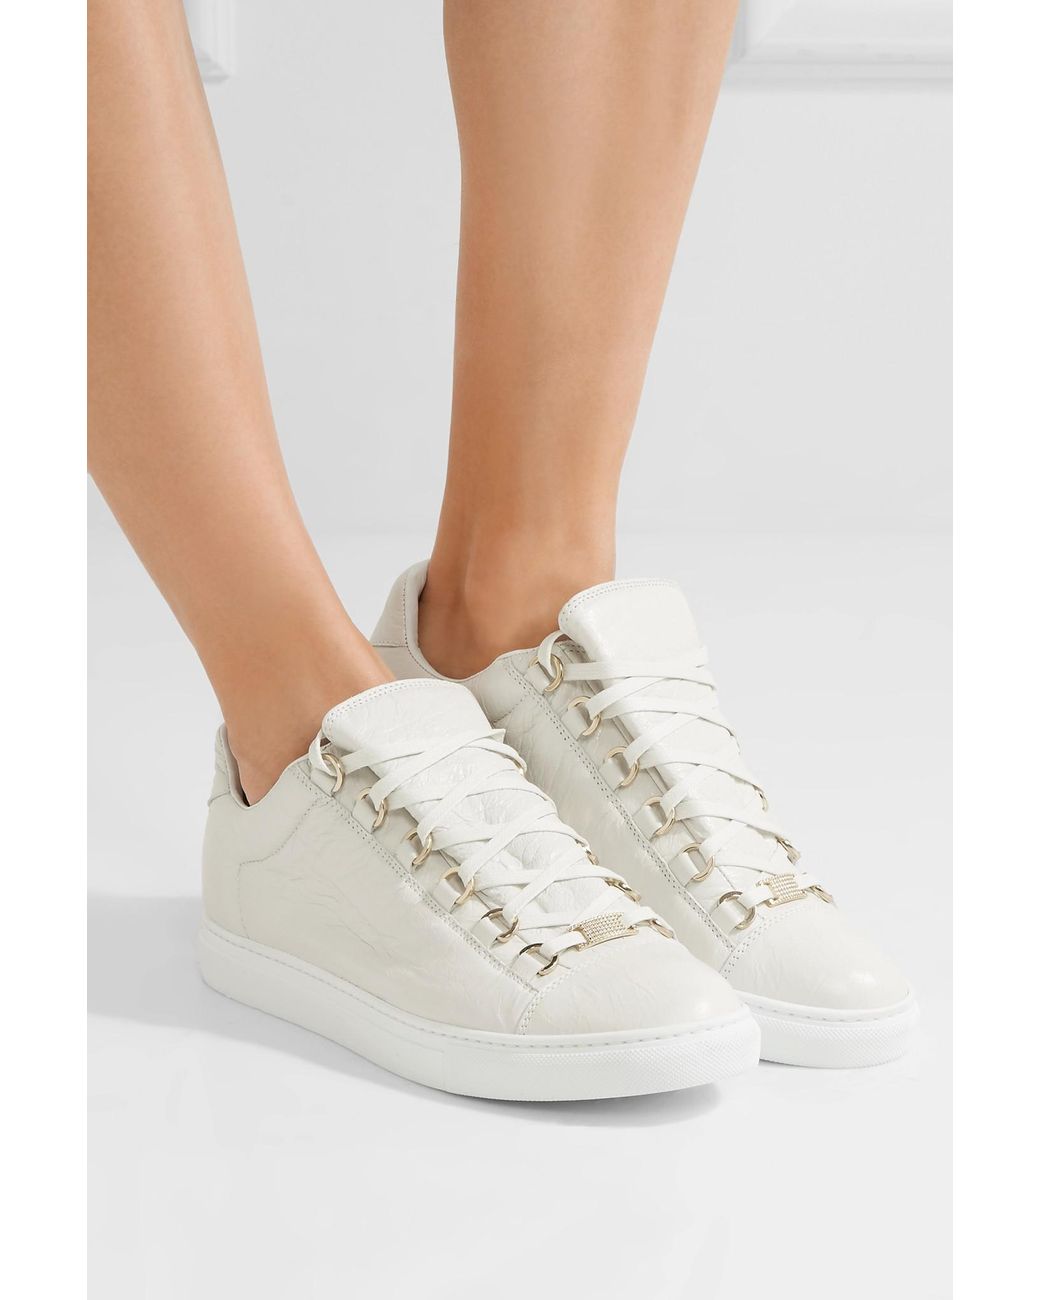 Balenciaga Arena Crinkled-leather Sneakers in White | Lyst